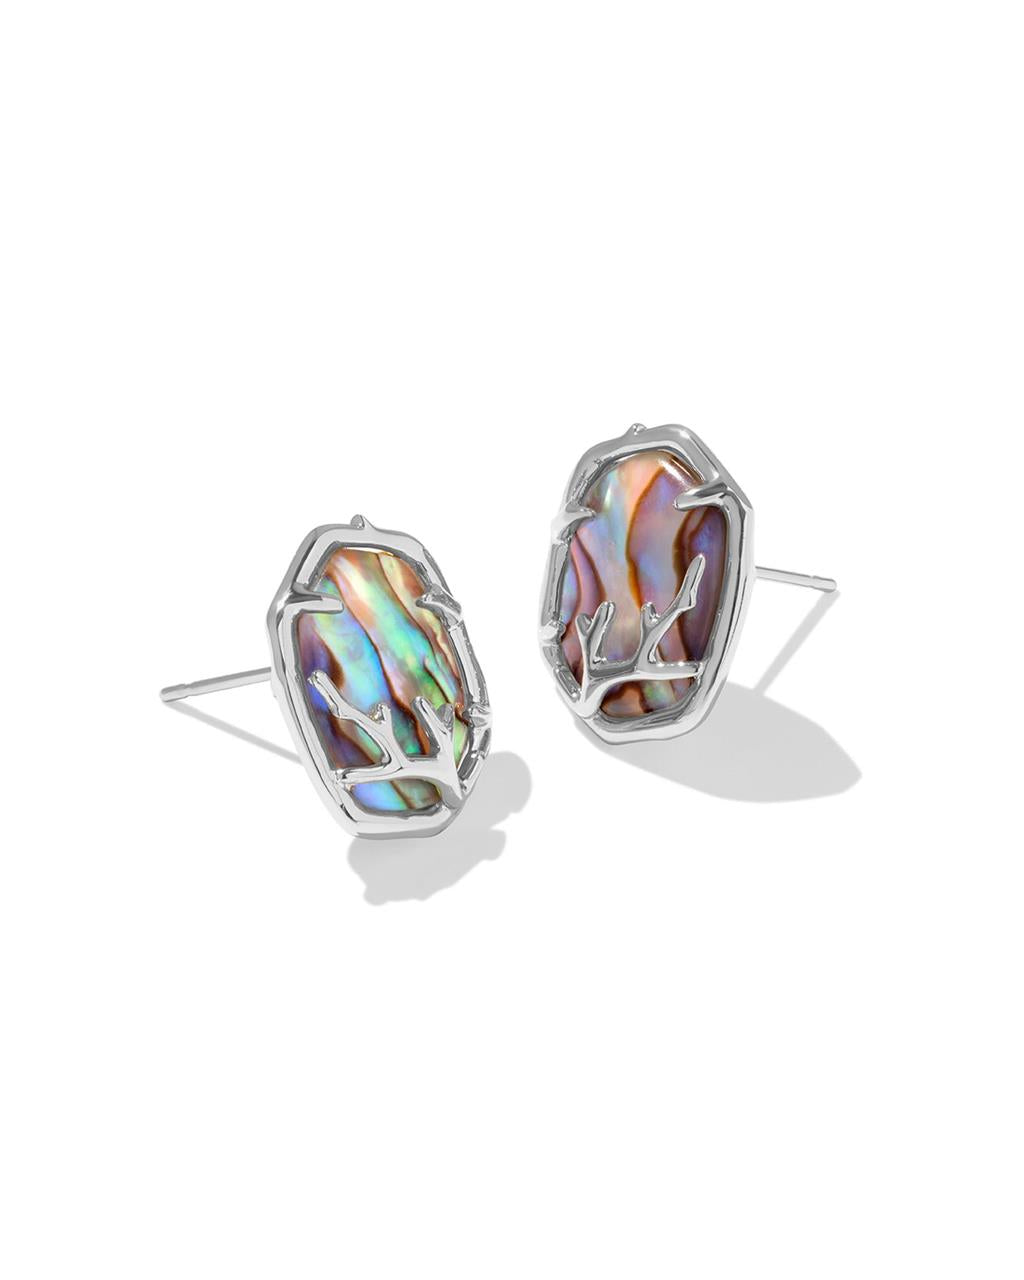 DAPHNE CORAL FRAME STUD EARRINGS SILVER ABALONE